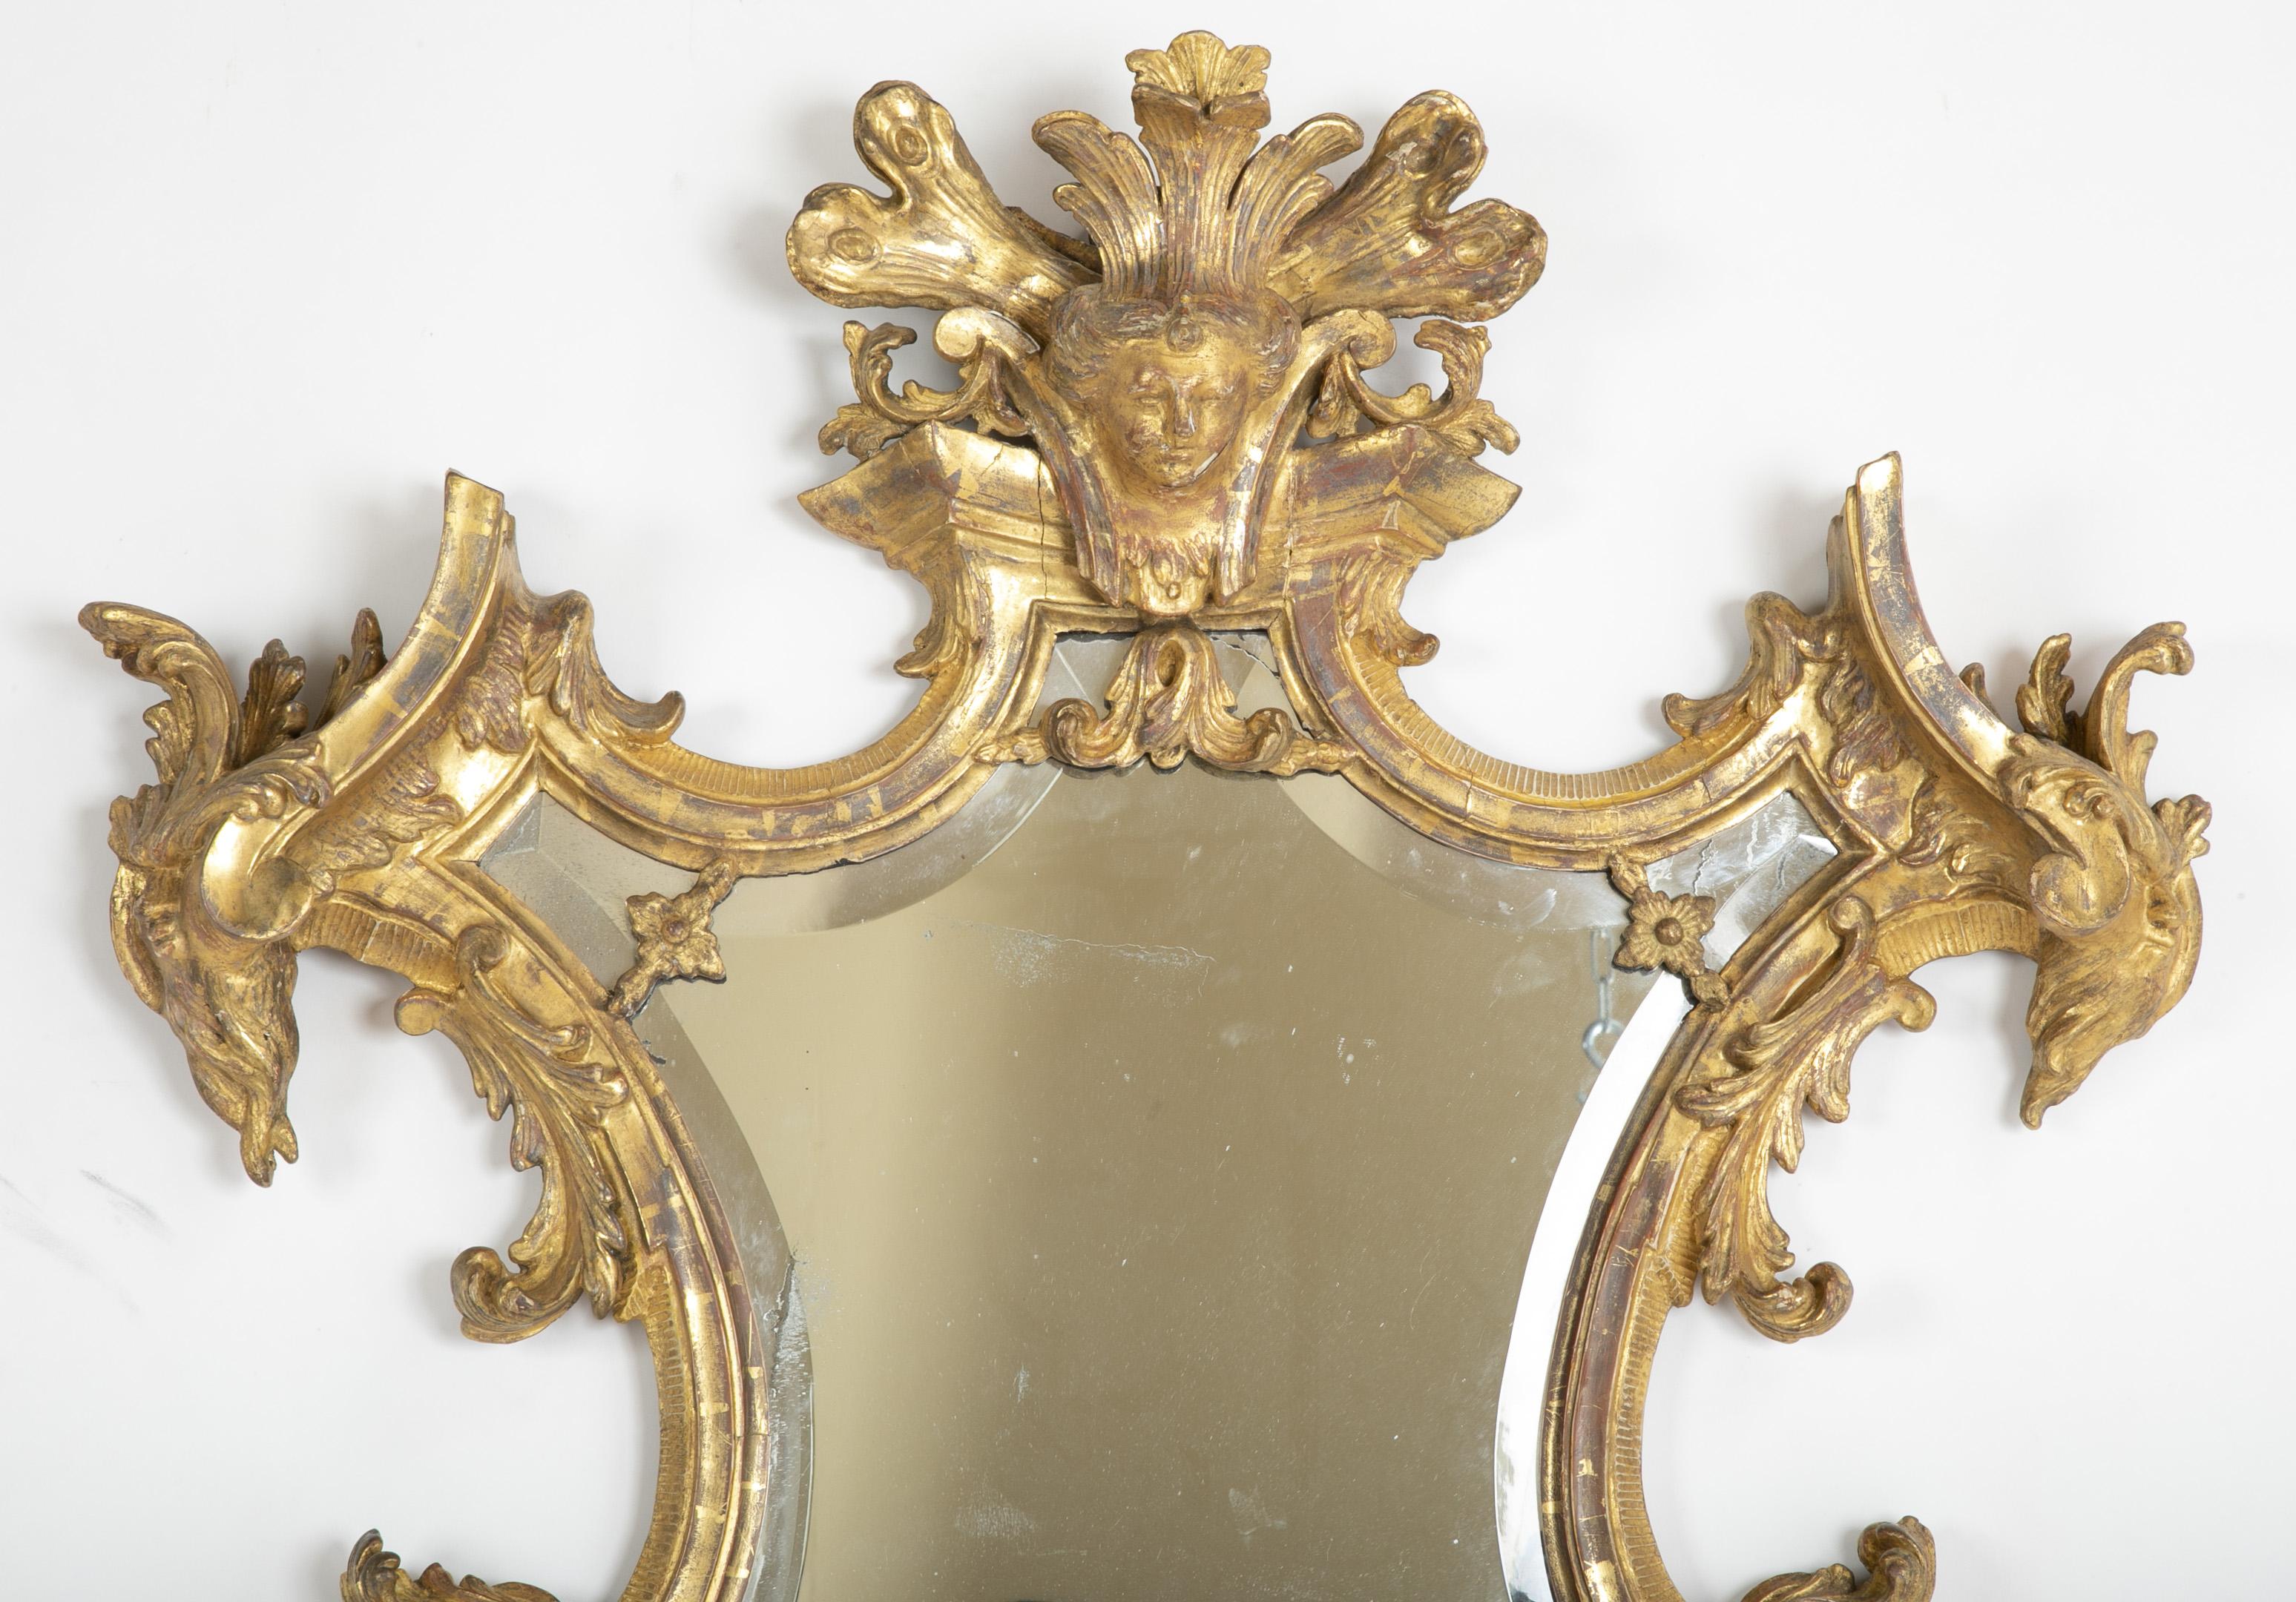 An Italian baroque mirror mid-18th century with beveled glass mirror.